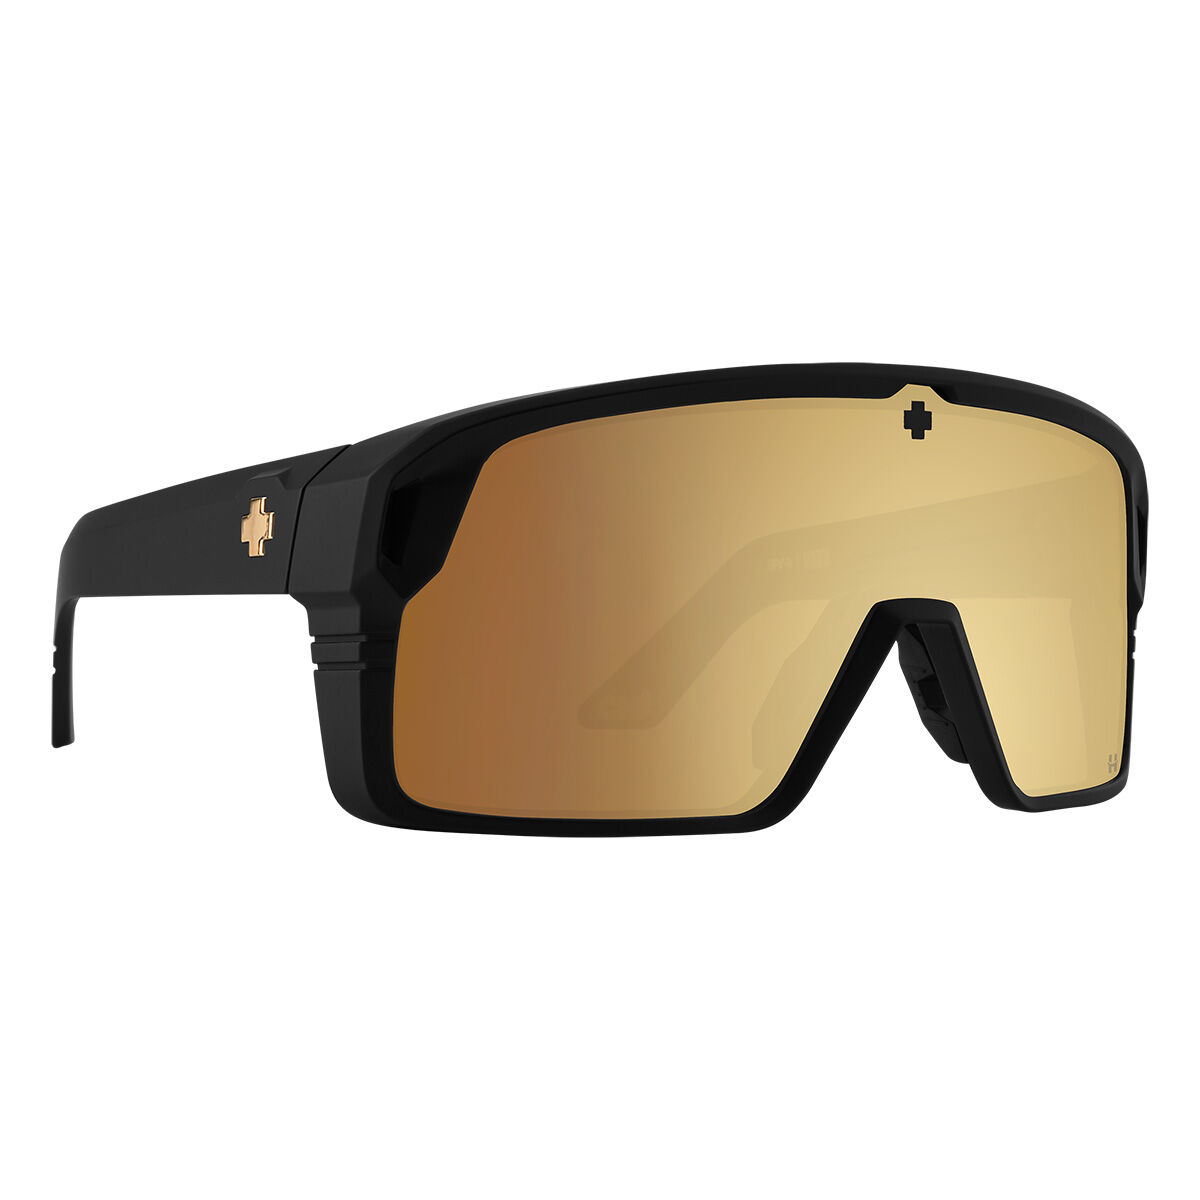 Men's and Women's Sunglasses | Spy Optic Official Site